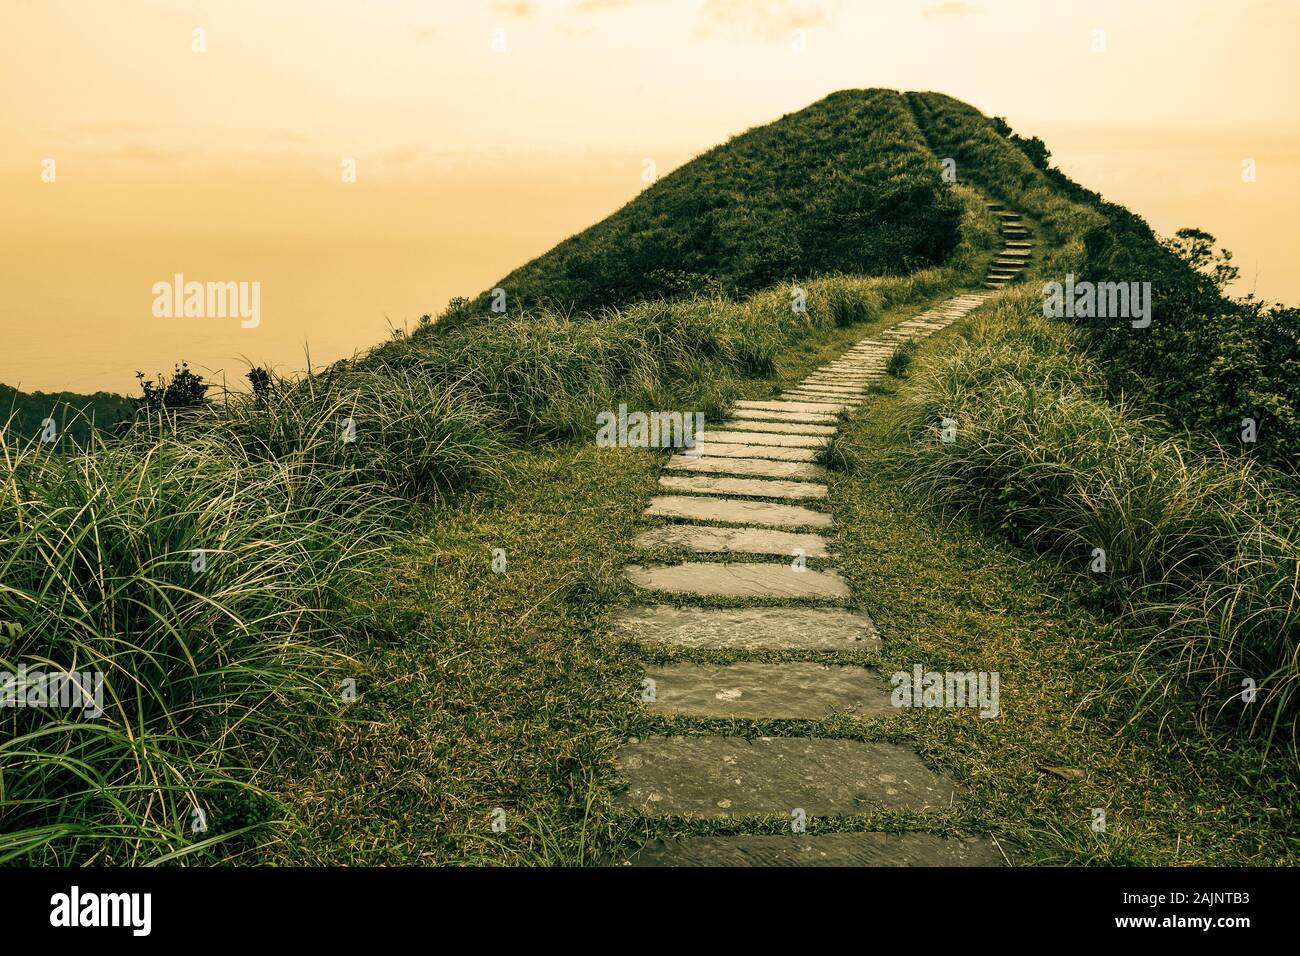 Fairy tale landscape and stepping stone path over a hill on the horizon at the Taoyuan Valley Trail in Taiwan Stock Photo